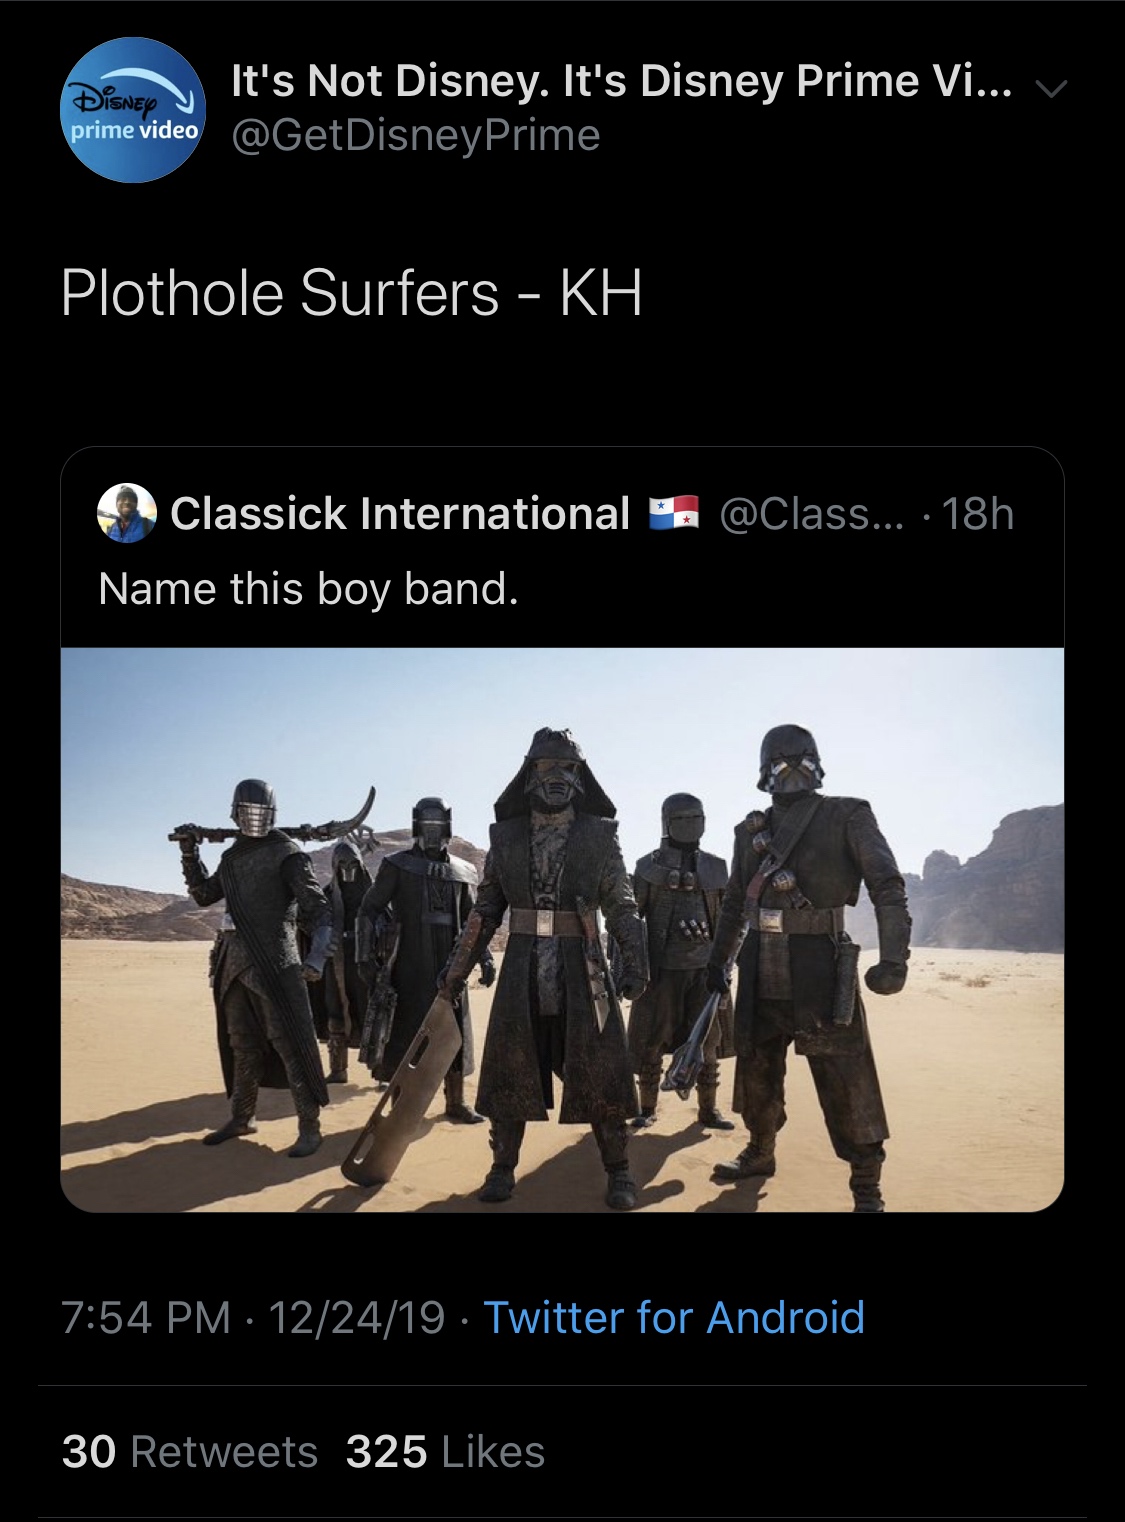 star wars knights of ren - Disney V prime video It's Not Disney. It's Disney Prime Vi... v Prime Plothole Surfers Kh Classick International a ... 18h Name this boy band. 122419 Twitter for Android 30 325